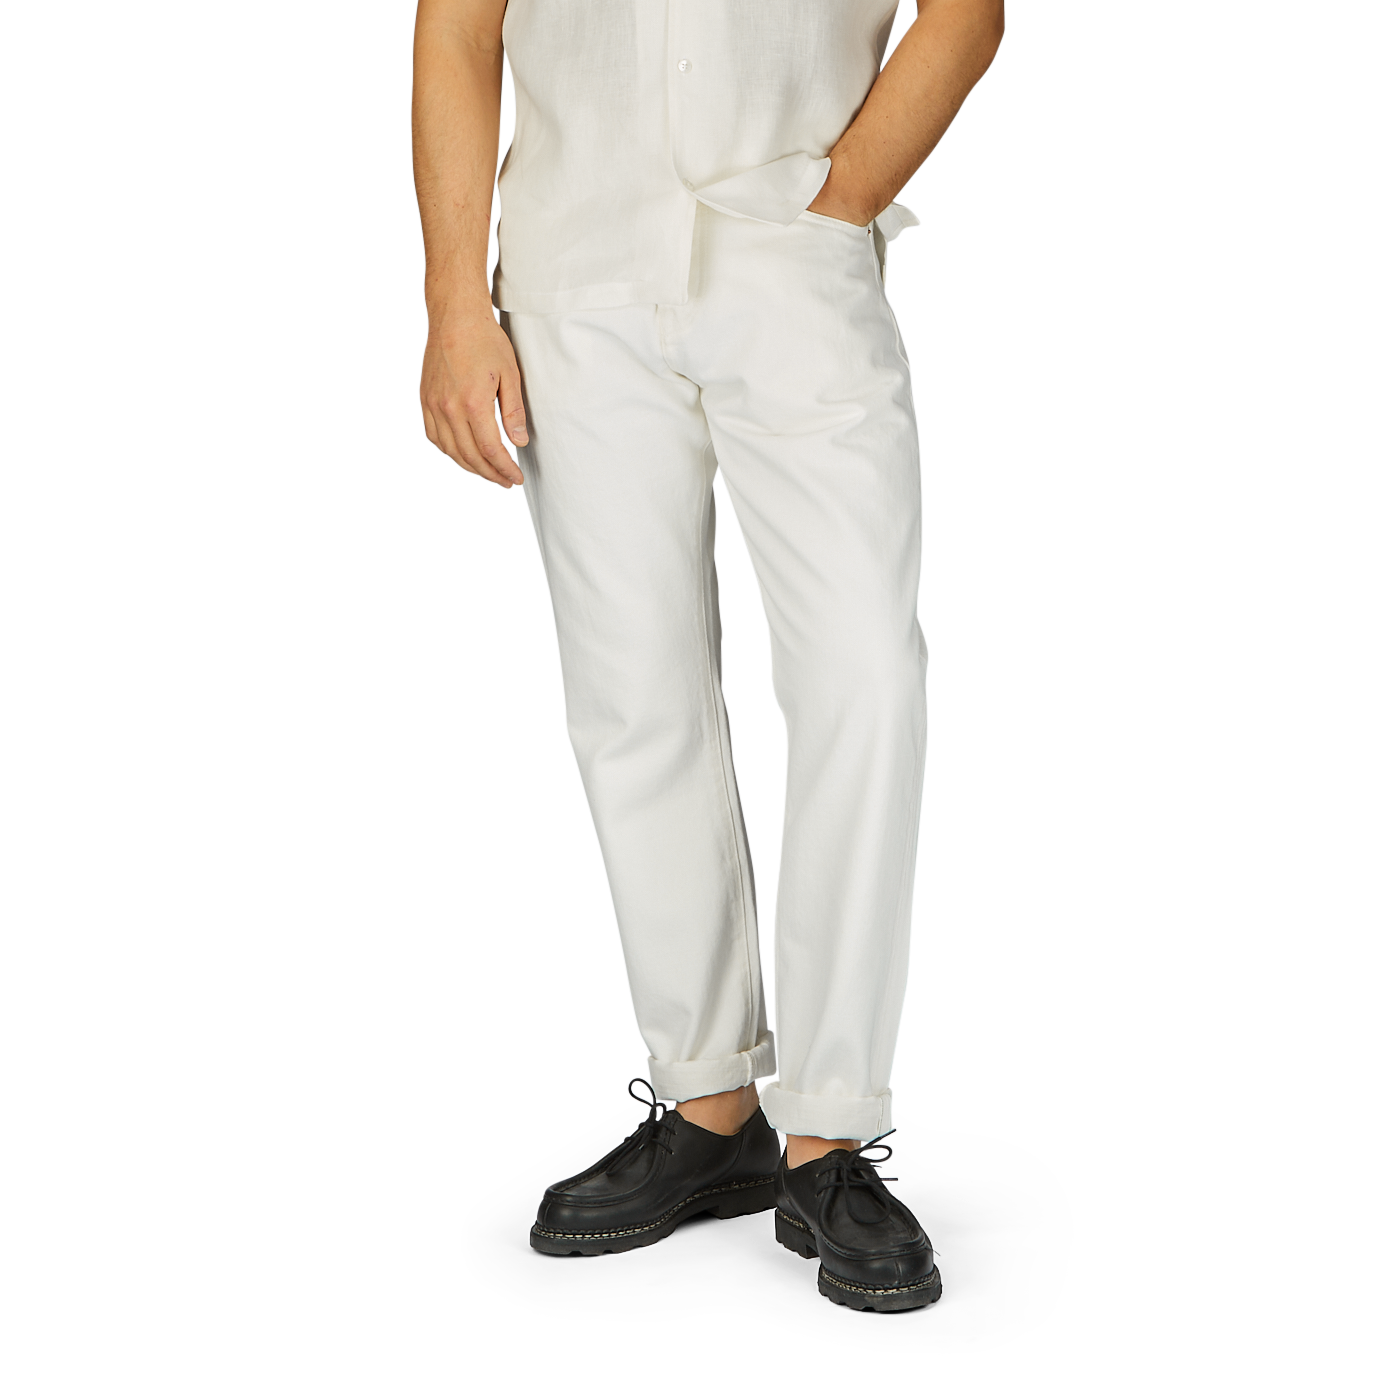 Man wearing a white shirt and Ecru Stone Washed Kuroki Cotton M5 Jeans by C.O.F Studio with dark shoes, standing against a plain background, cropped at the waist.